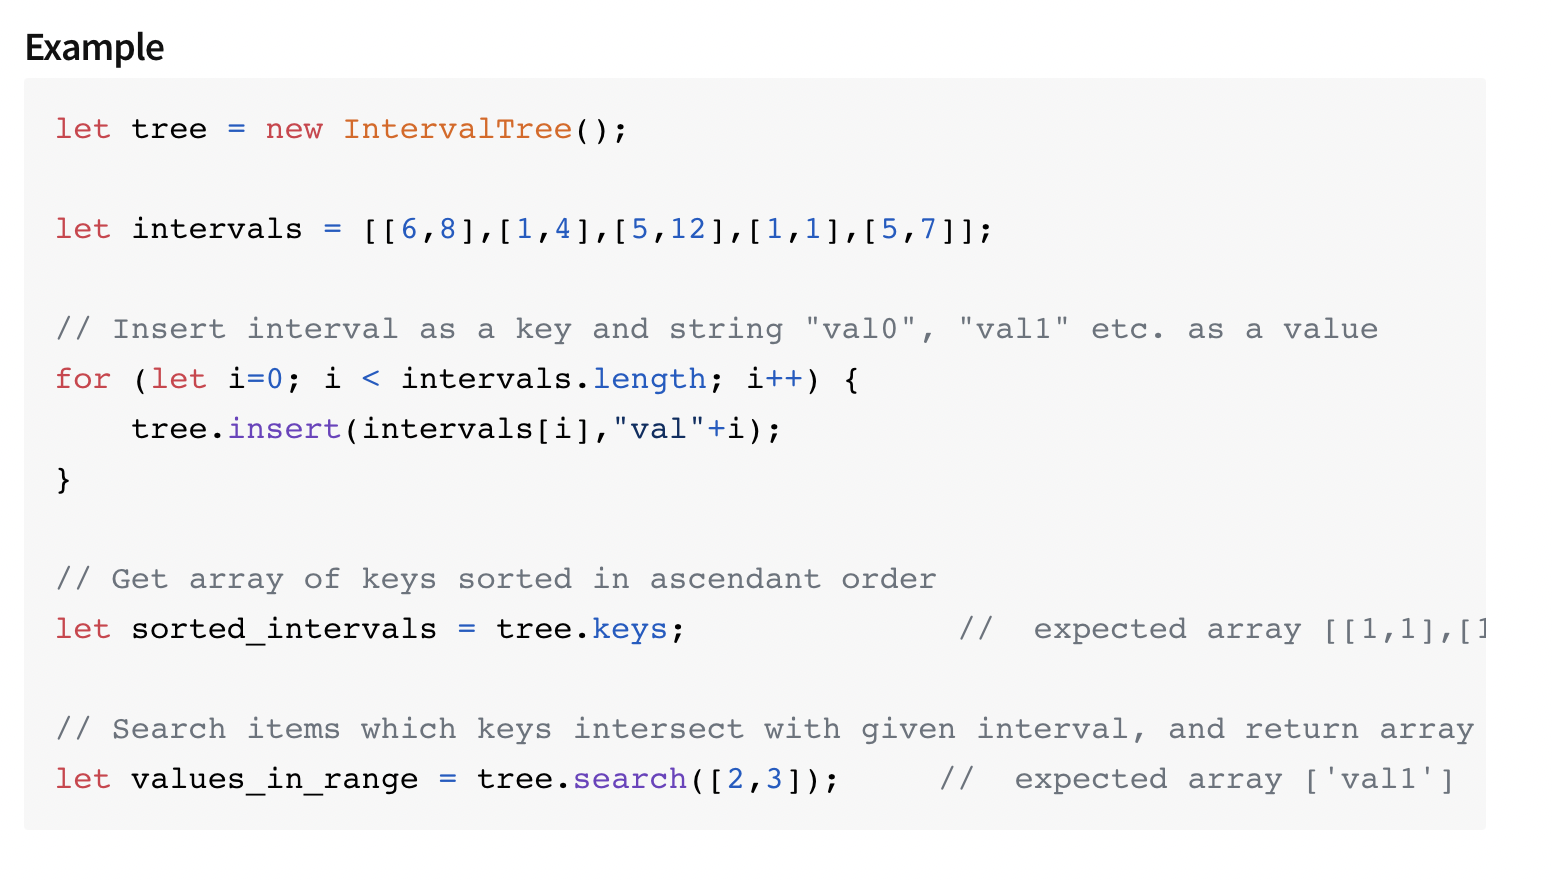 Code example for interval tree library